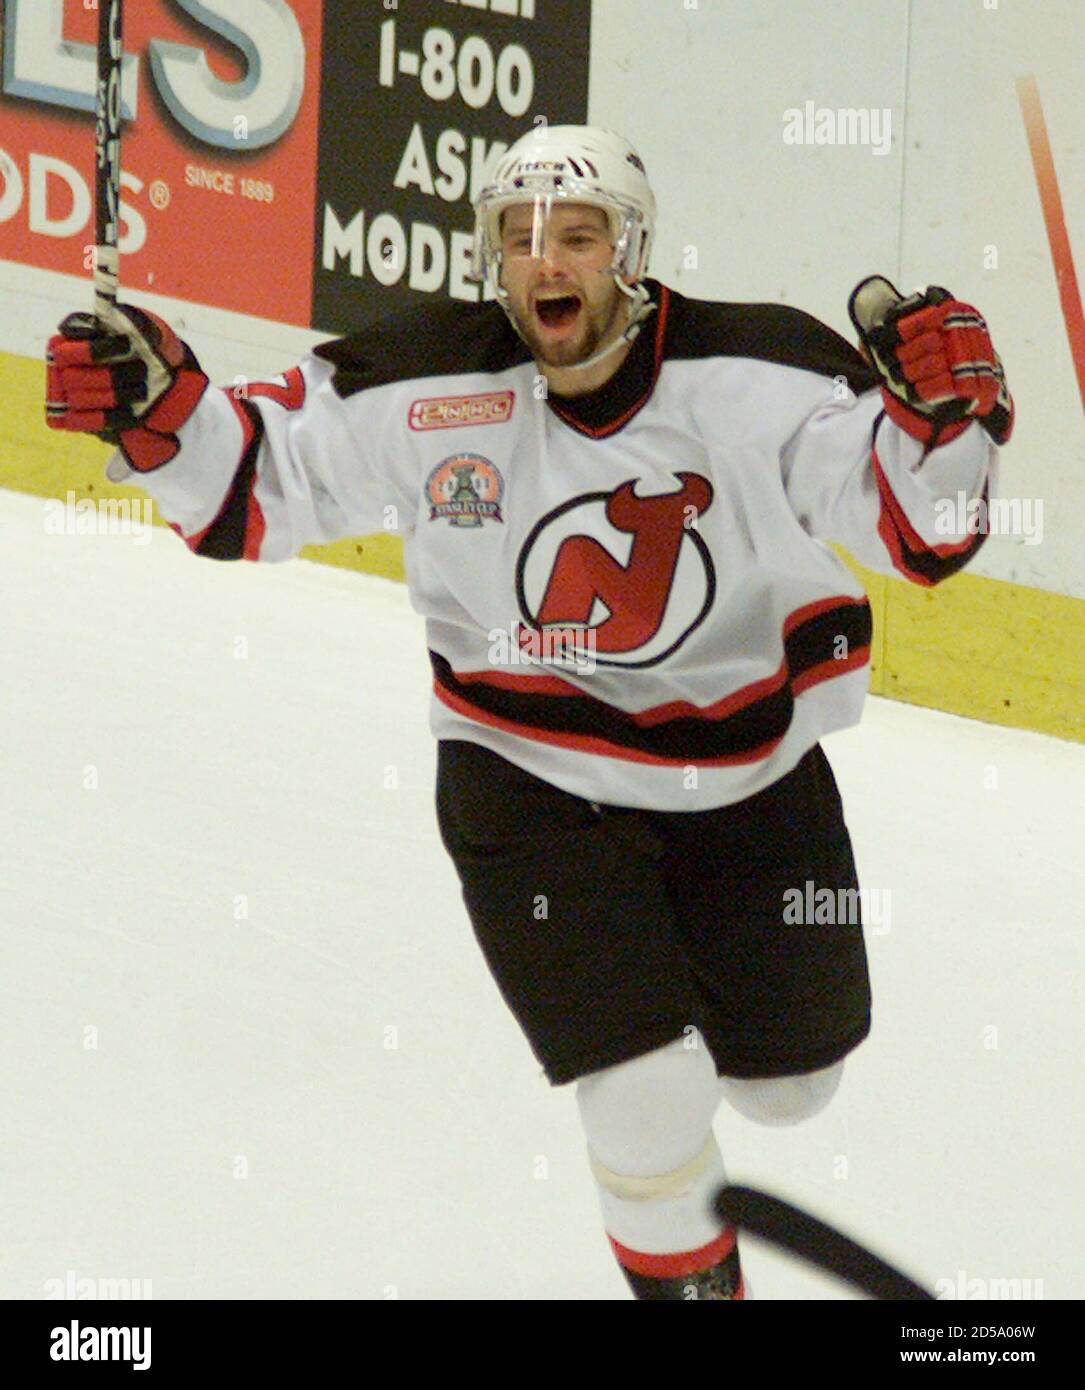 New Jersey Devils' center Petr Sykora celebrates his second goal of the  game during the second period of the Devils 7-3 win over the Dallas Stars  in Game 1 of the 2000